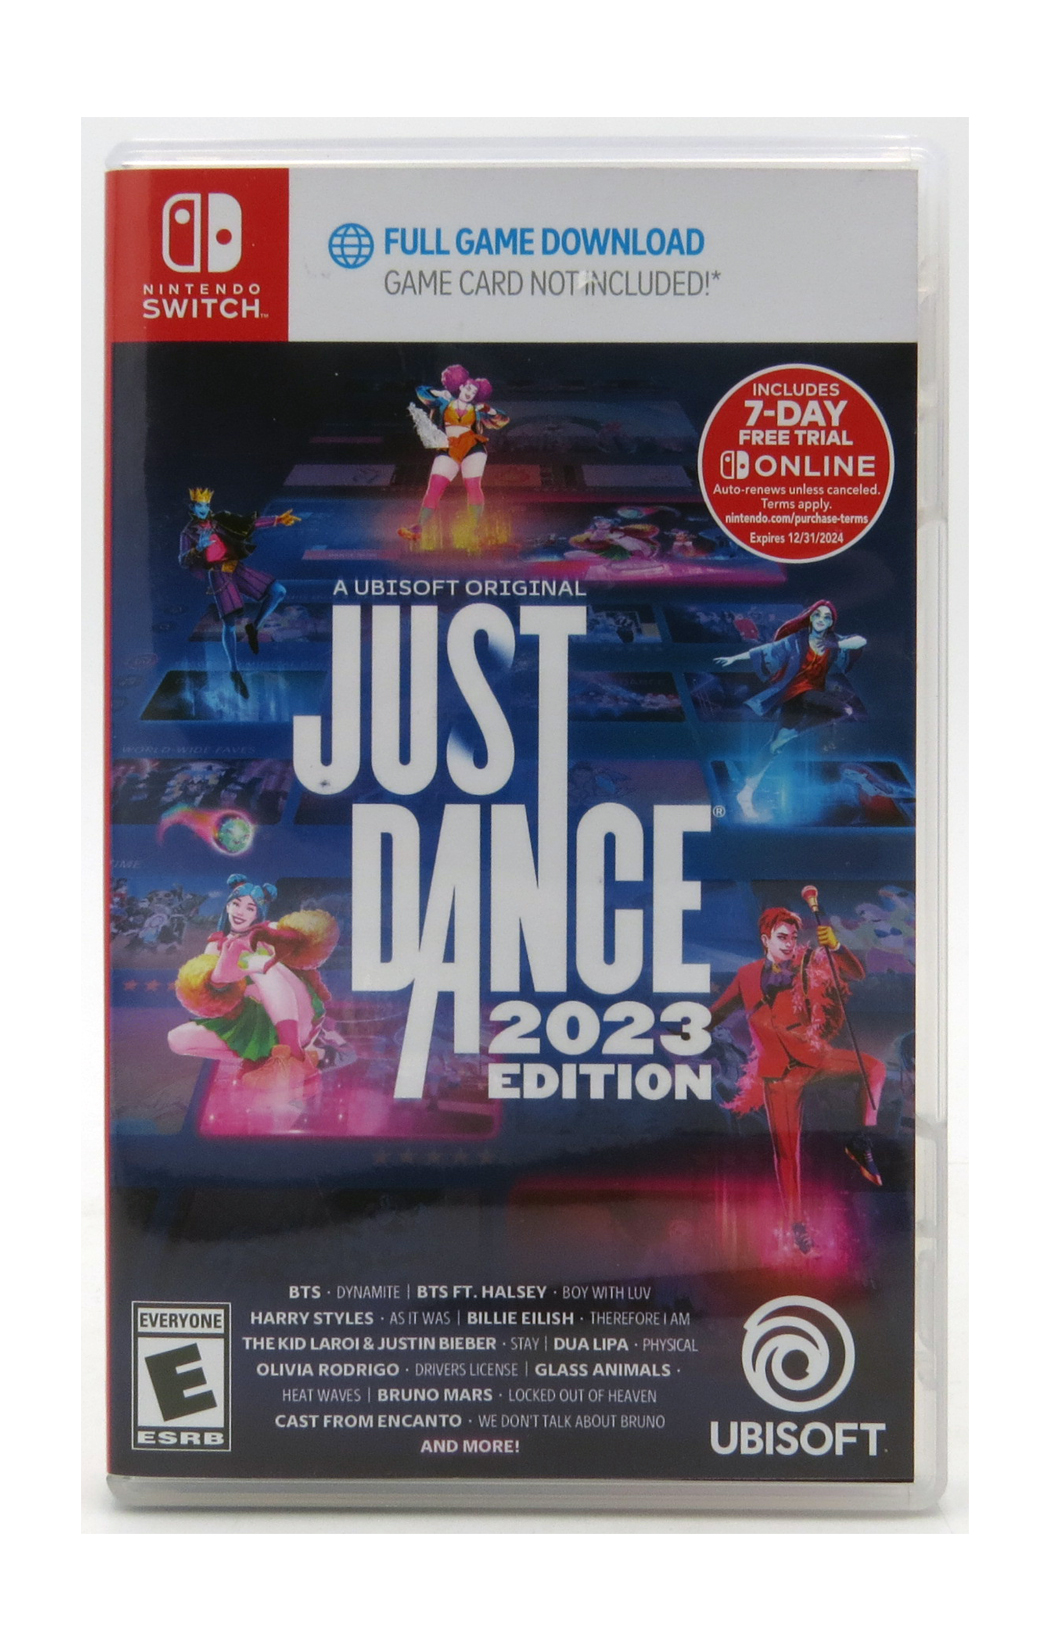 Just Dance 2023 Nintendo 887256113834 | Game in Switch Box - Original Code eBay In Package Edition